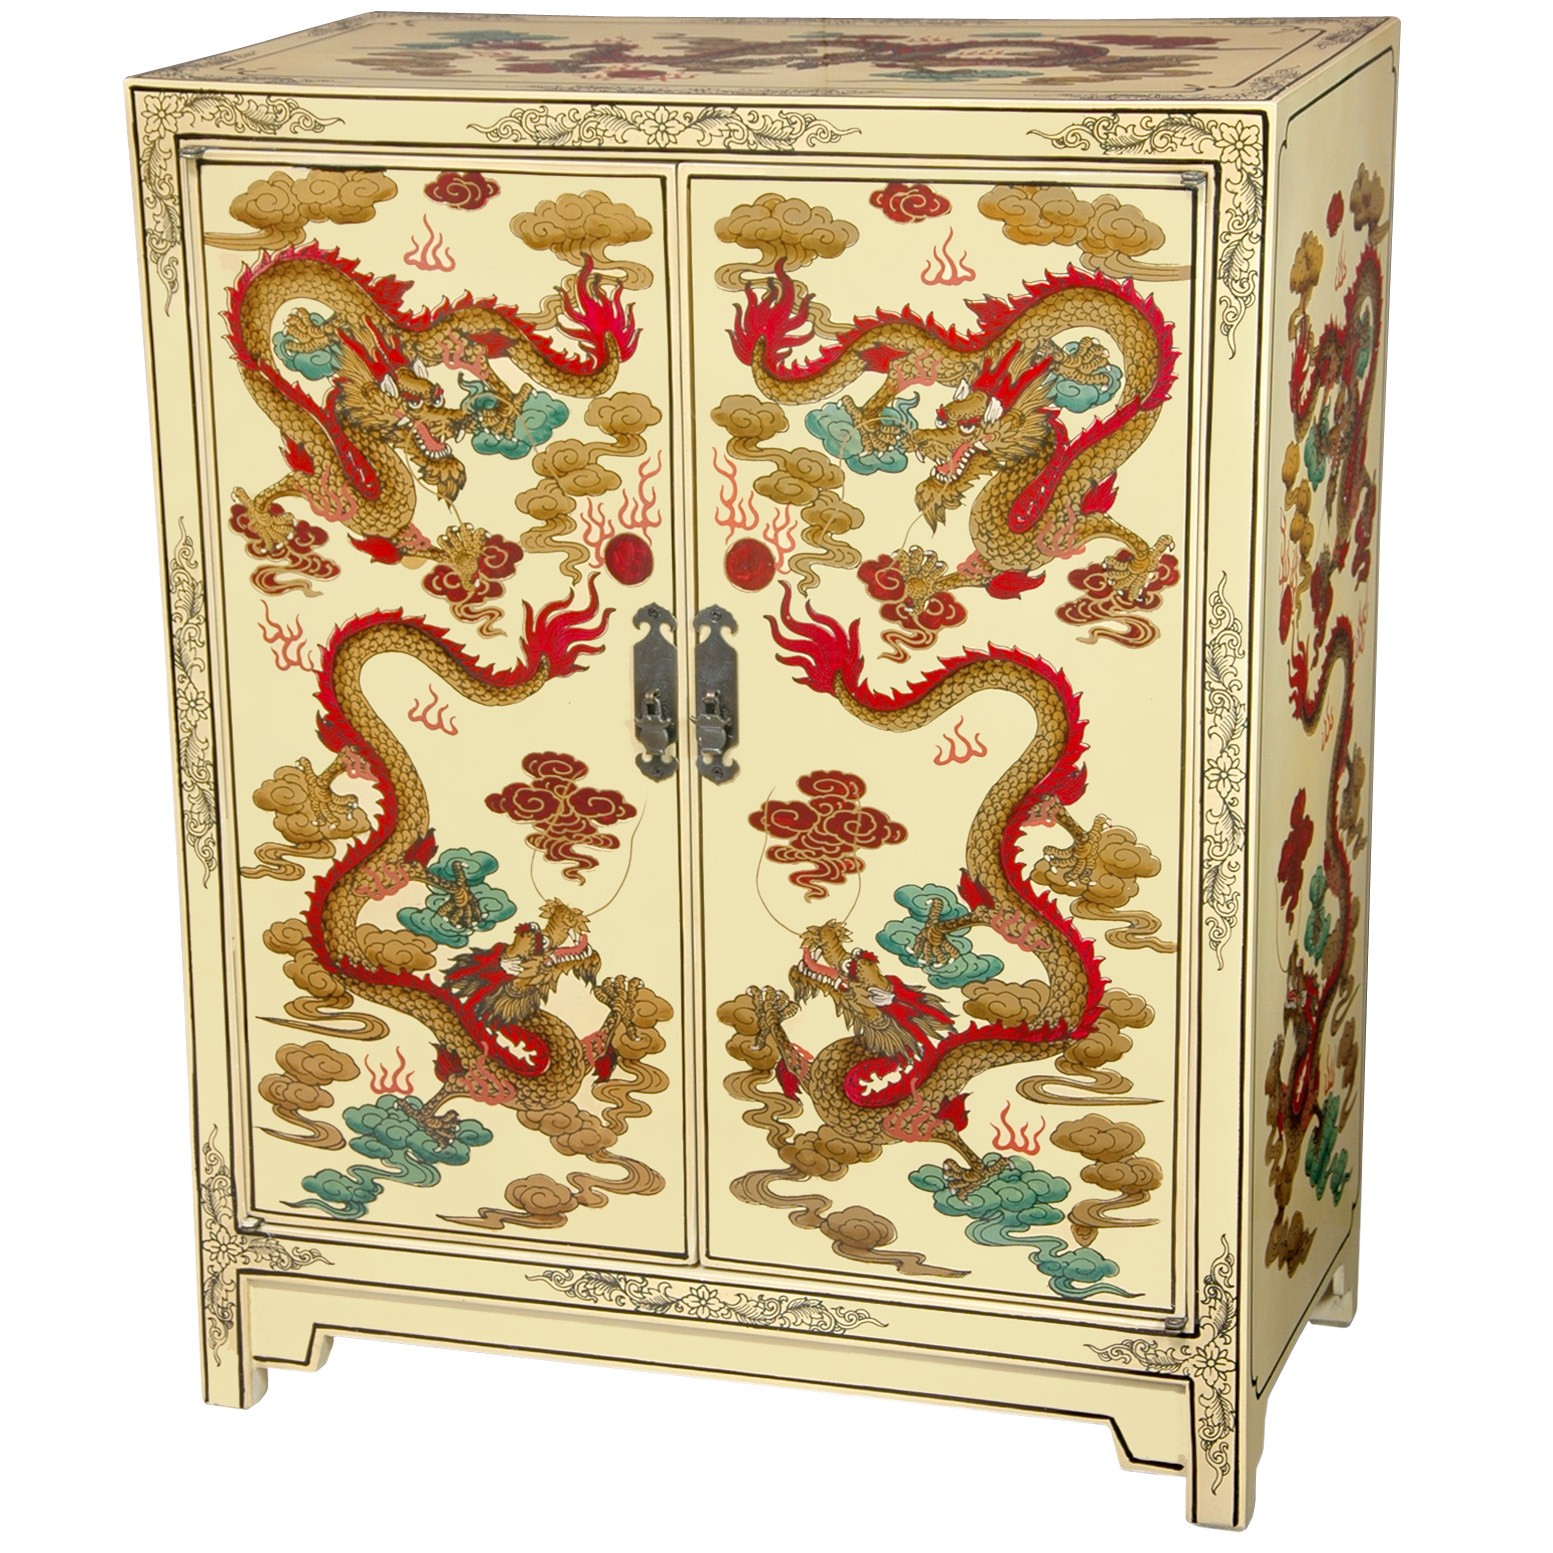 Oriental Furniture Classic Asian Furniture and Decor 30-Inch Ivory Lacquer Dragon Design Shoe Cabinet